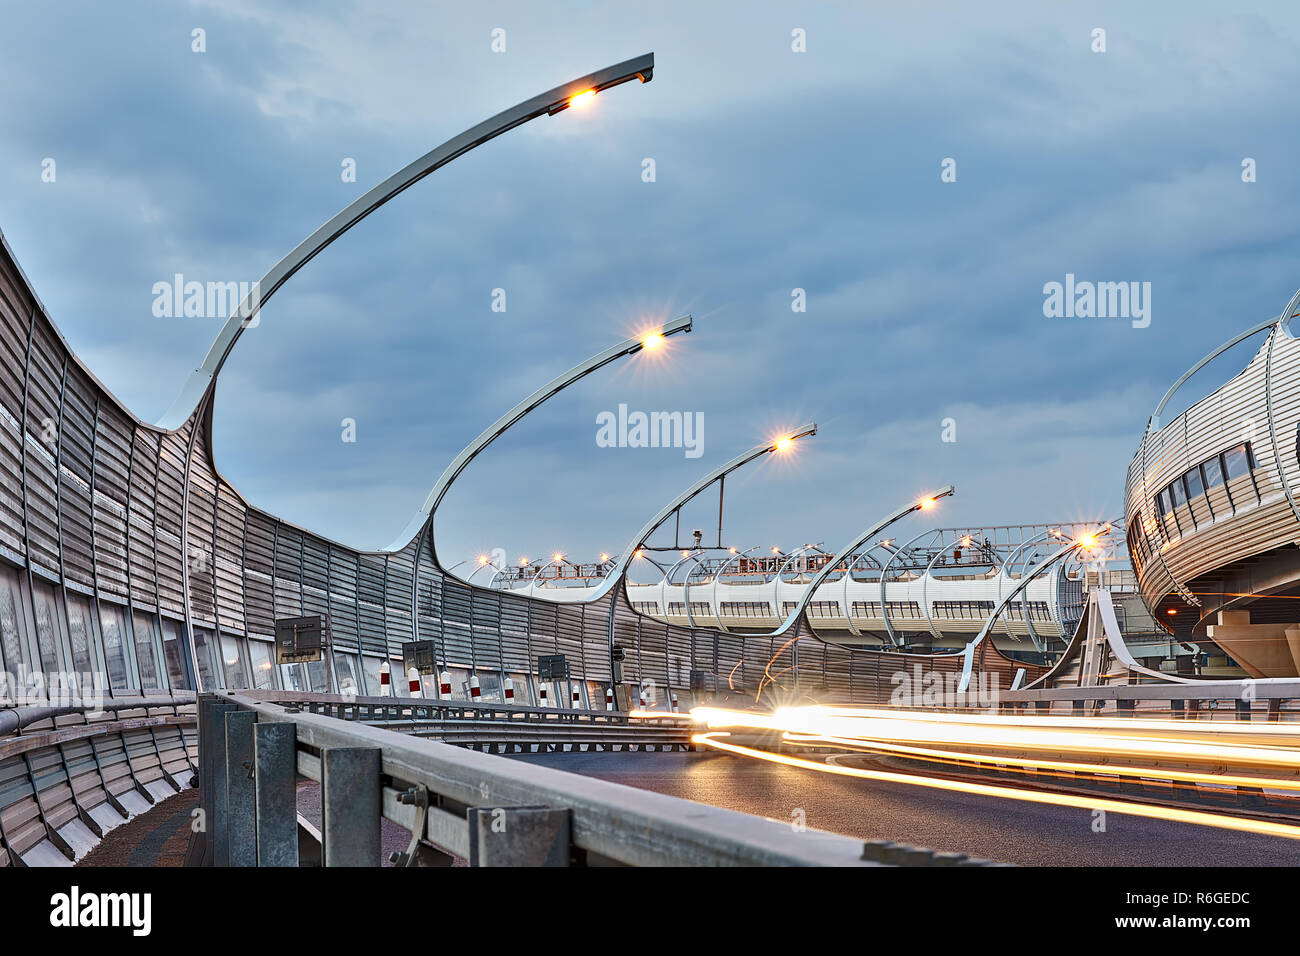 St. Petersburg, Russia - August 24, 2018: Street lighting on expressway with highway sound proof barrier panel and safety barrier fence in twilight in Stock Photo